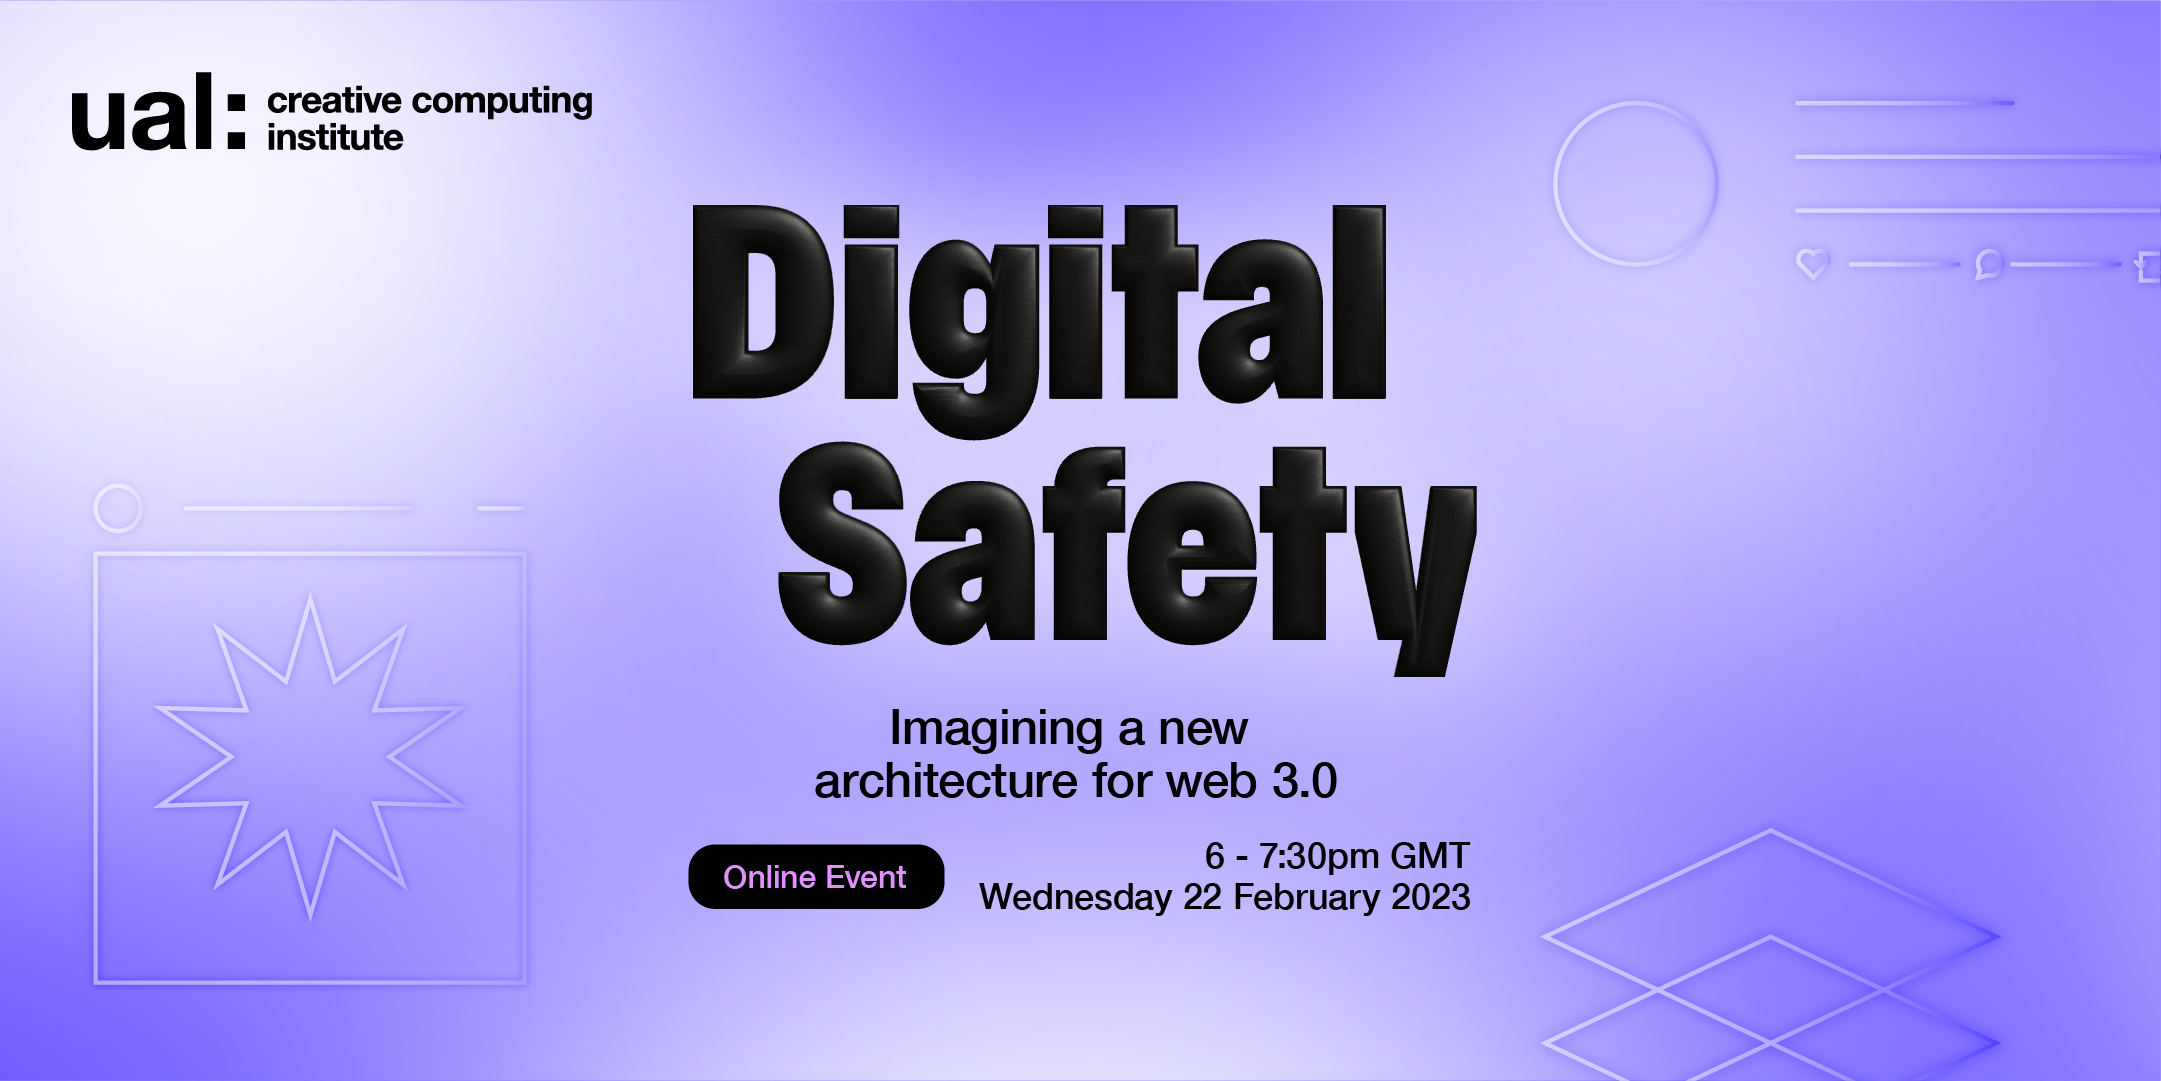 Digital safety: imagining a new architecture for web 3.0